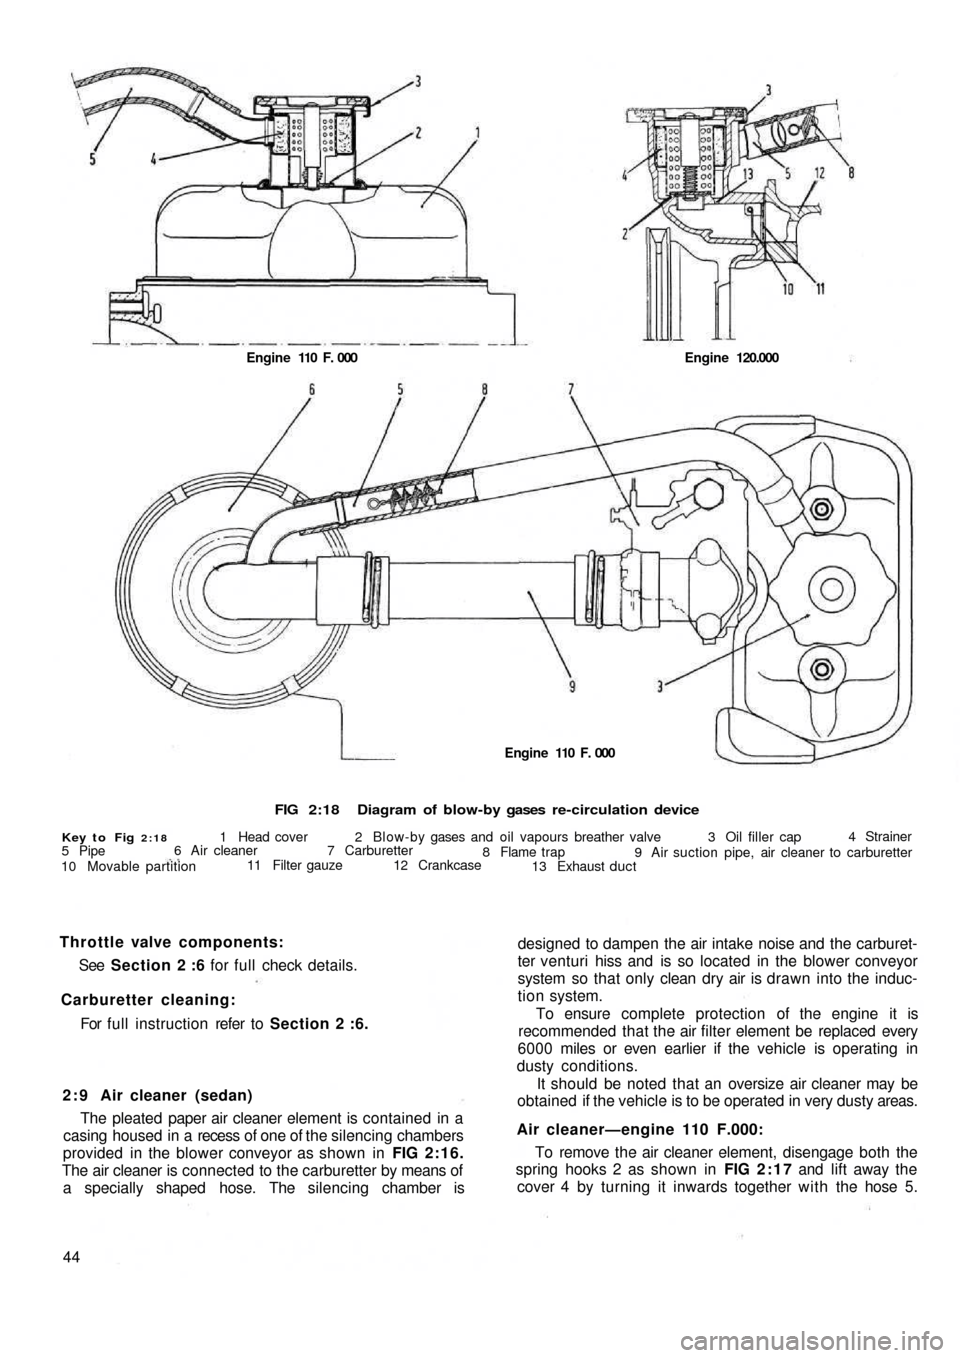 FIAT 500 1957 1.G Workshop Manual FIG 2:18Diagram of blow-by gases  re-circulation device
Key to Fig 2:181 Head cover 2 Blow-by gases and  oil vapours breather valve 3 Oil filler cap4 Strainer
9 Air suction pipe, air cleaner to carbur